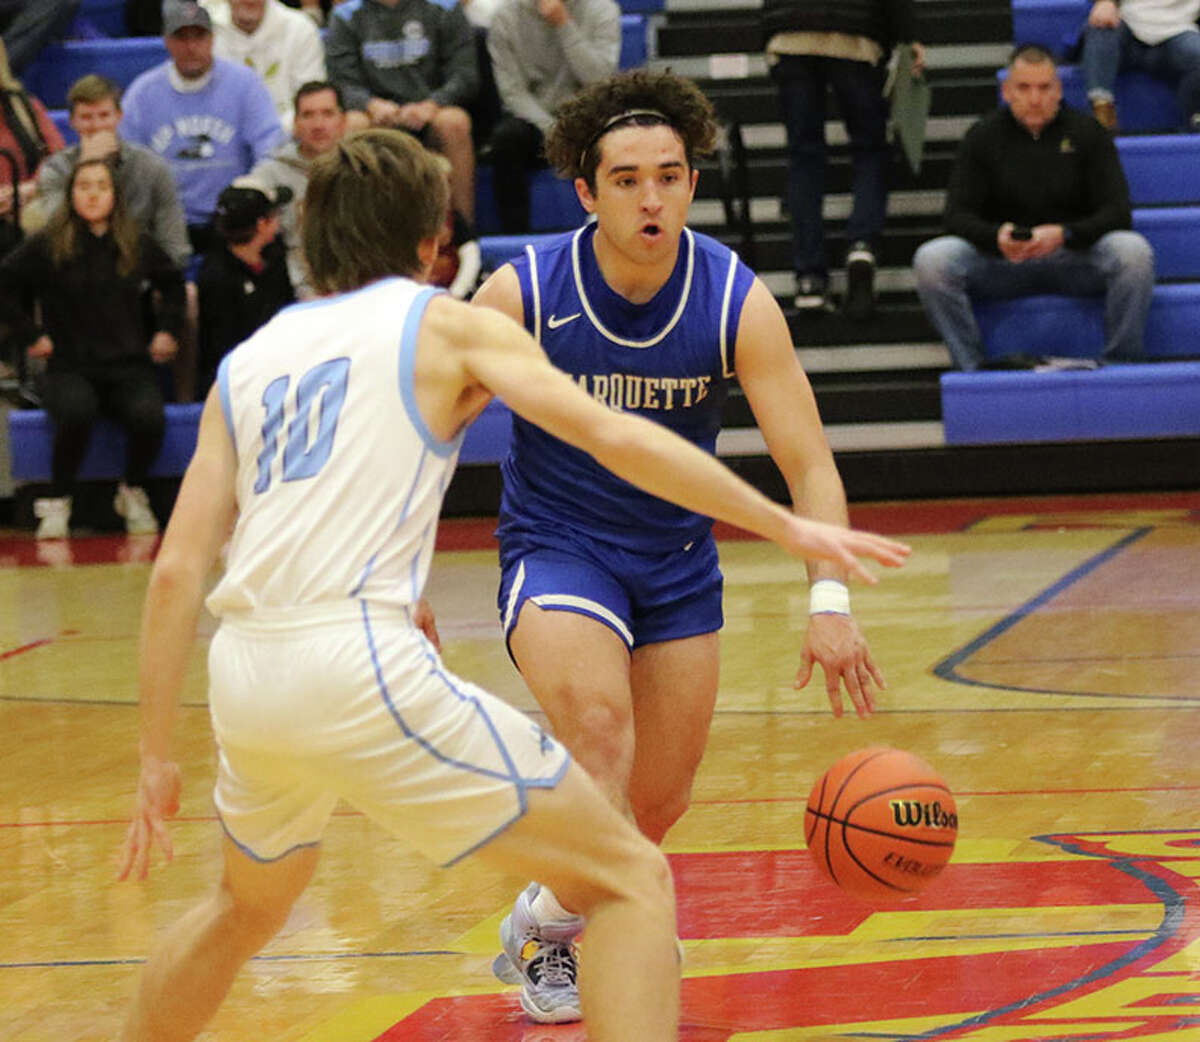 Marquette Catholic's Parker Macias brings the ball upcourt against Jersey's Drake Goetten (10) in a Roxana Tourney game last month. On Tuesday, Macias scored 19 points in the Explorers' GMC win over Father McGivney in Alton.